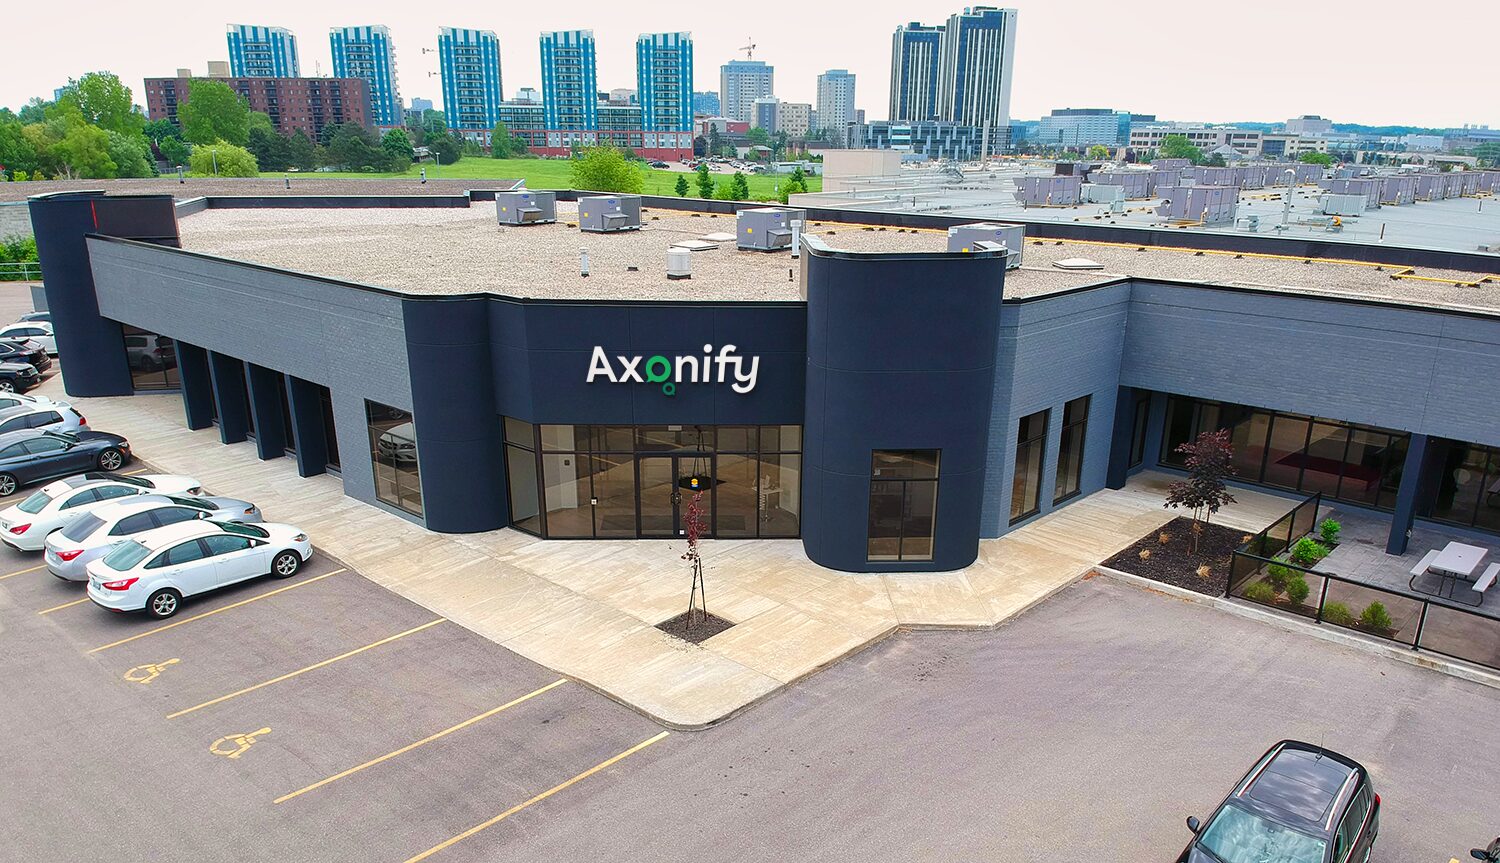 Aerial photo of Axonify's headquarters in Waterloo, Canada